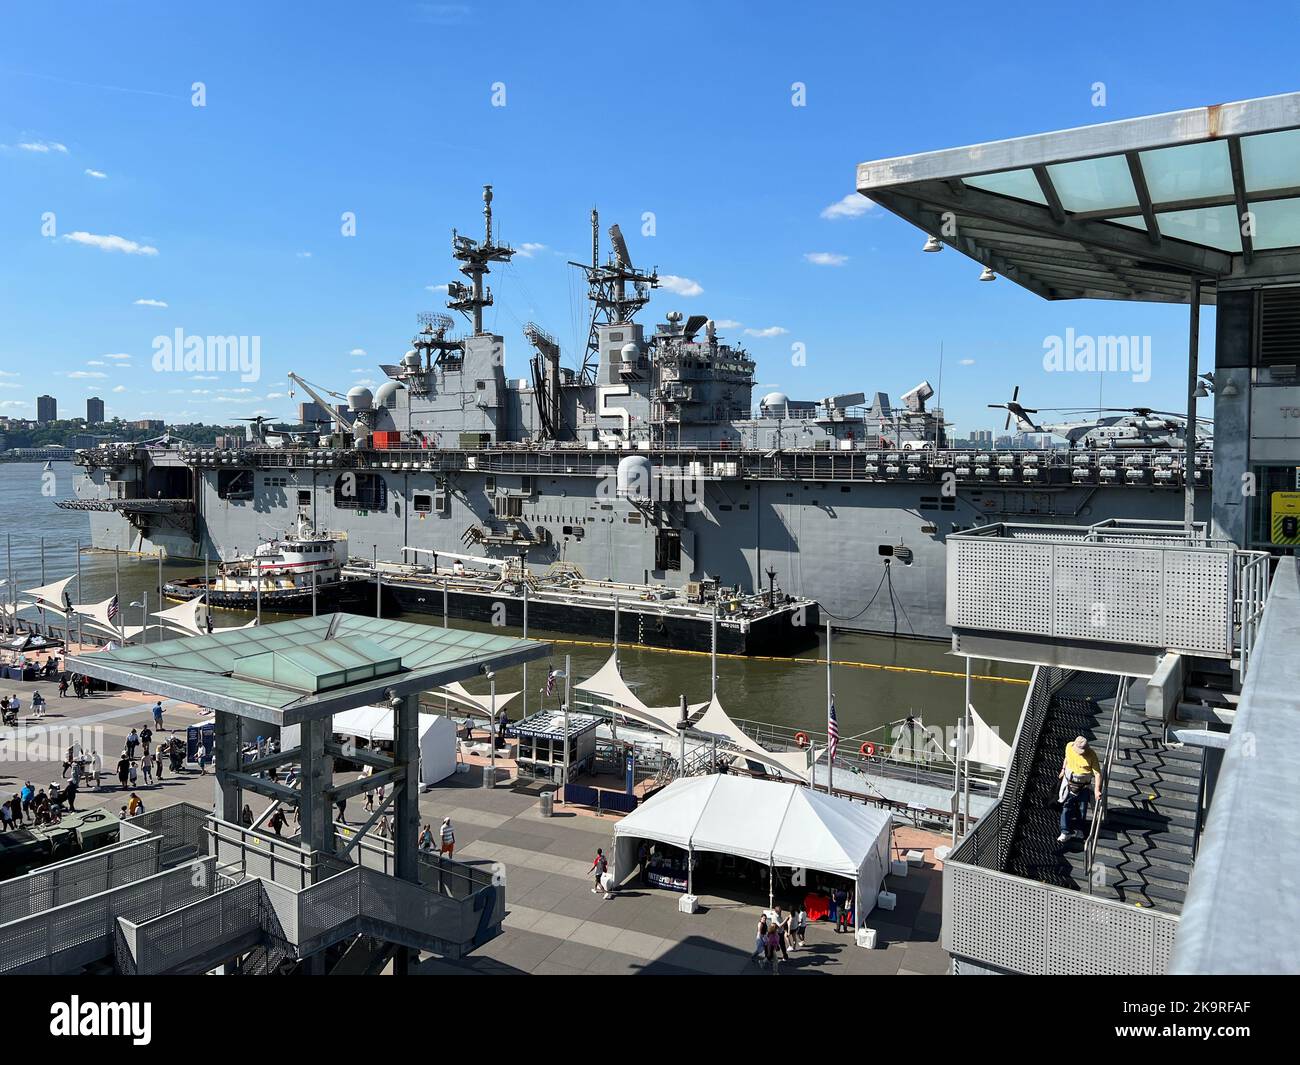 The USS’’ Intrepid Sea, Air & Space Museum is an American military and maritime history museum in New York City with a collection of museum ships. Stock Photo